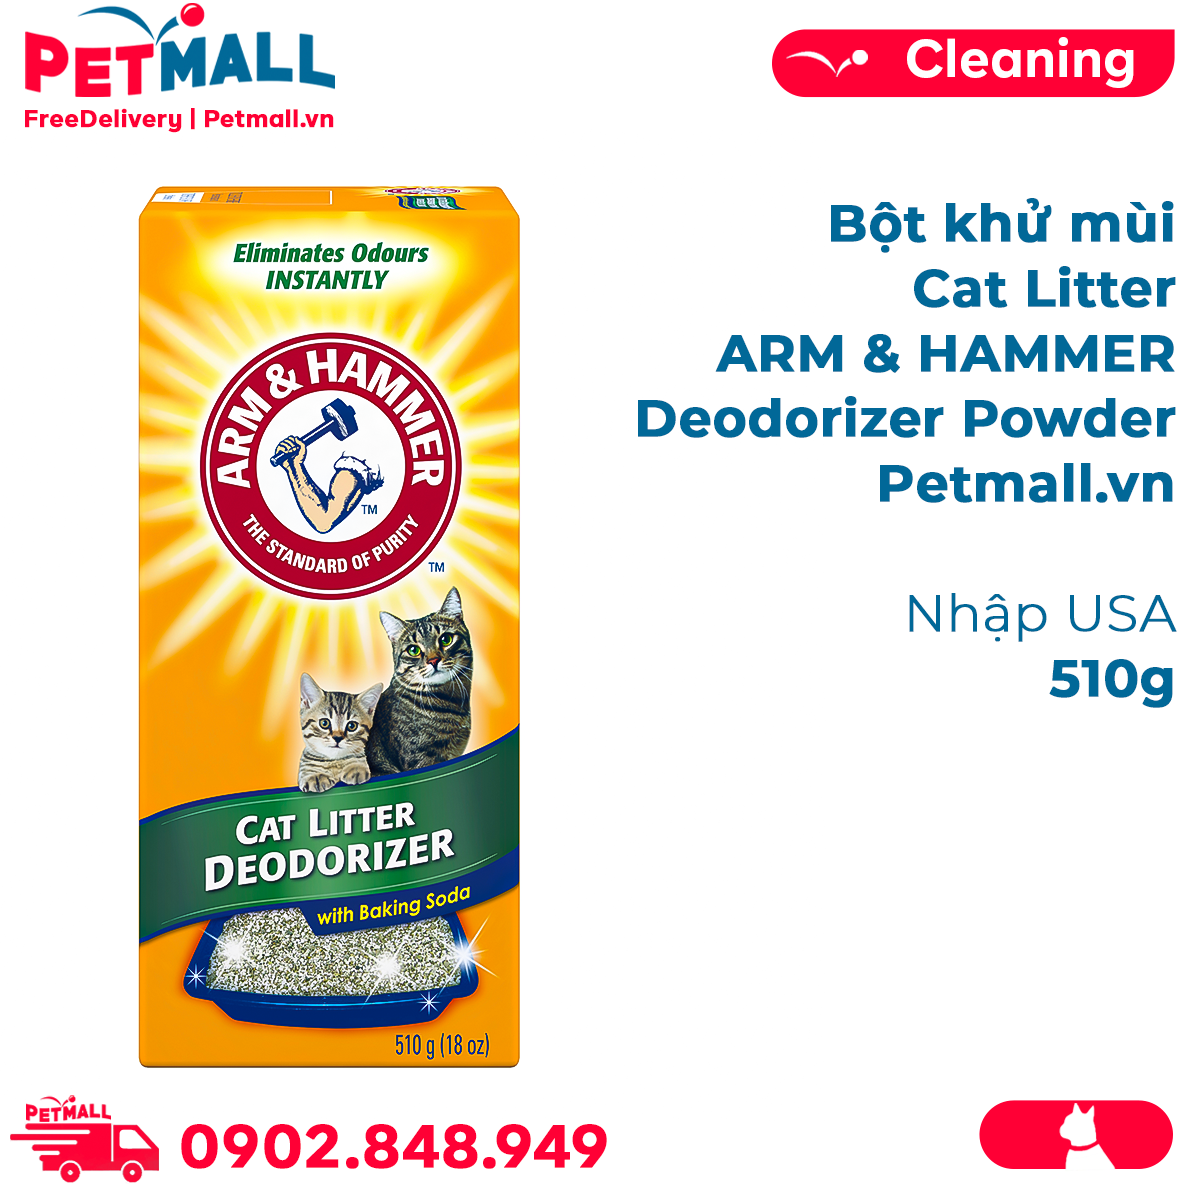 For Cat - Litter boxes - Mats & Liners – PETMALL.VN